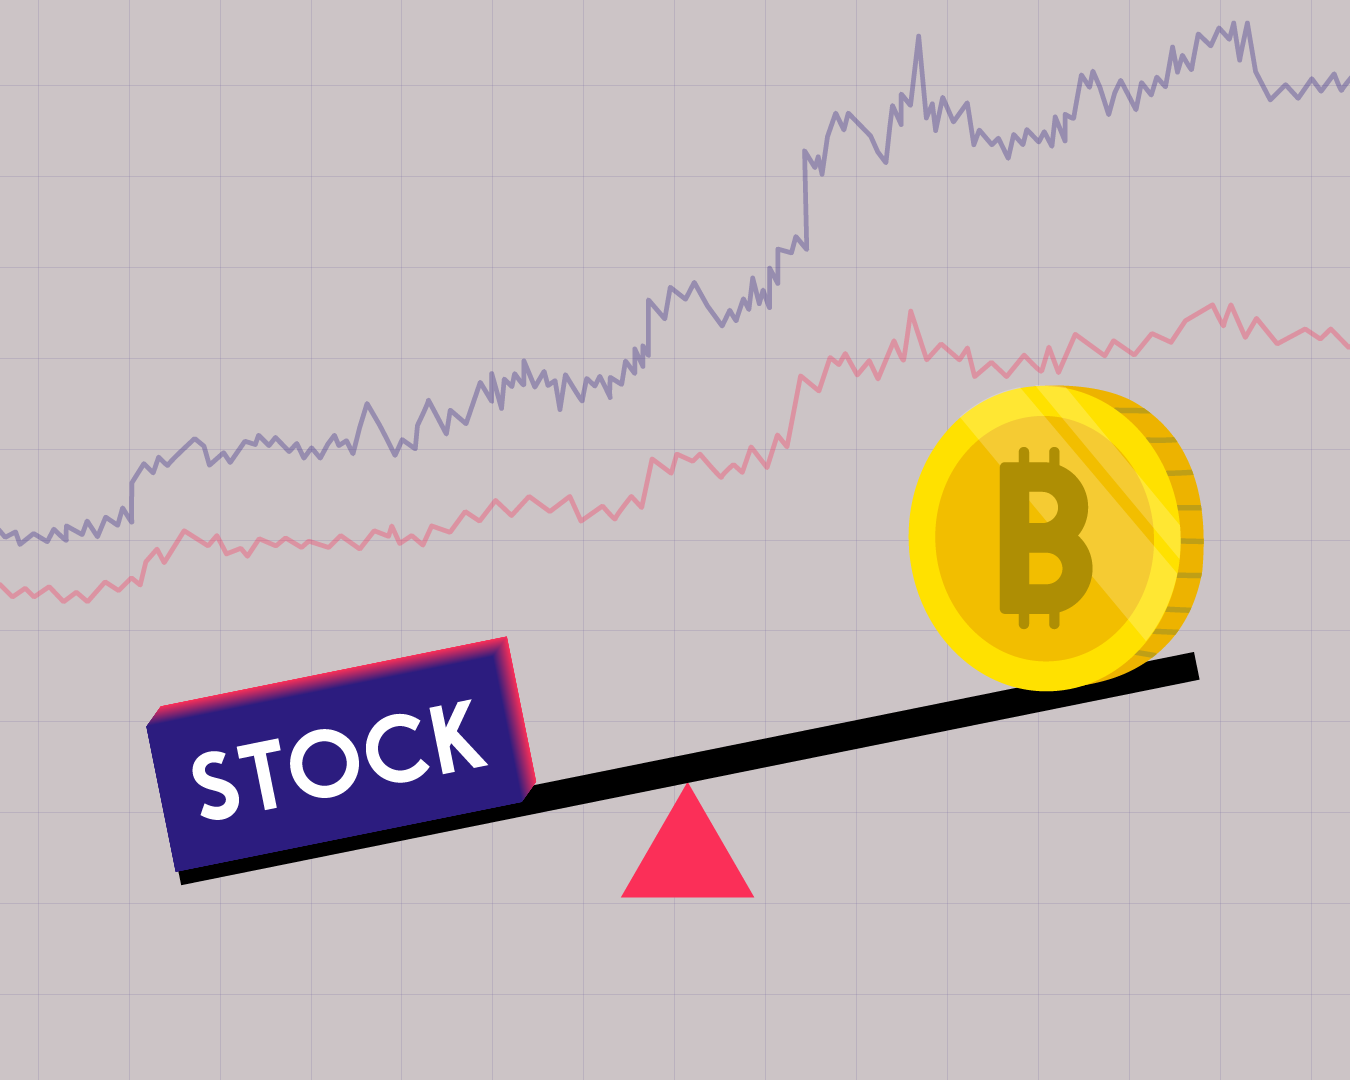 What Is The Difference Between Crypto And Stocks?